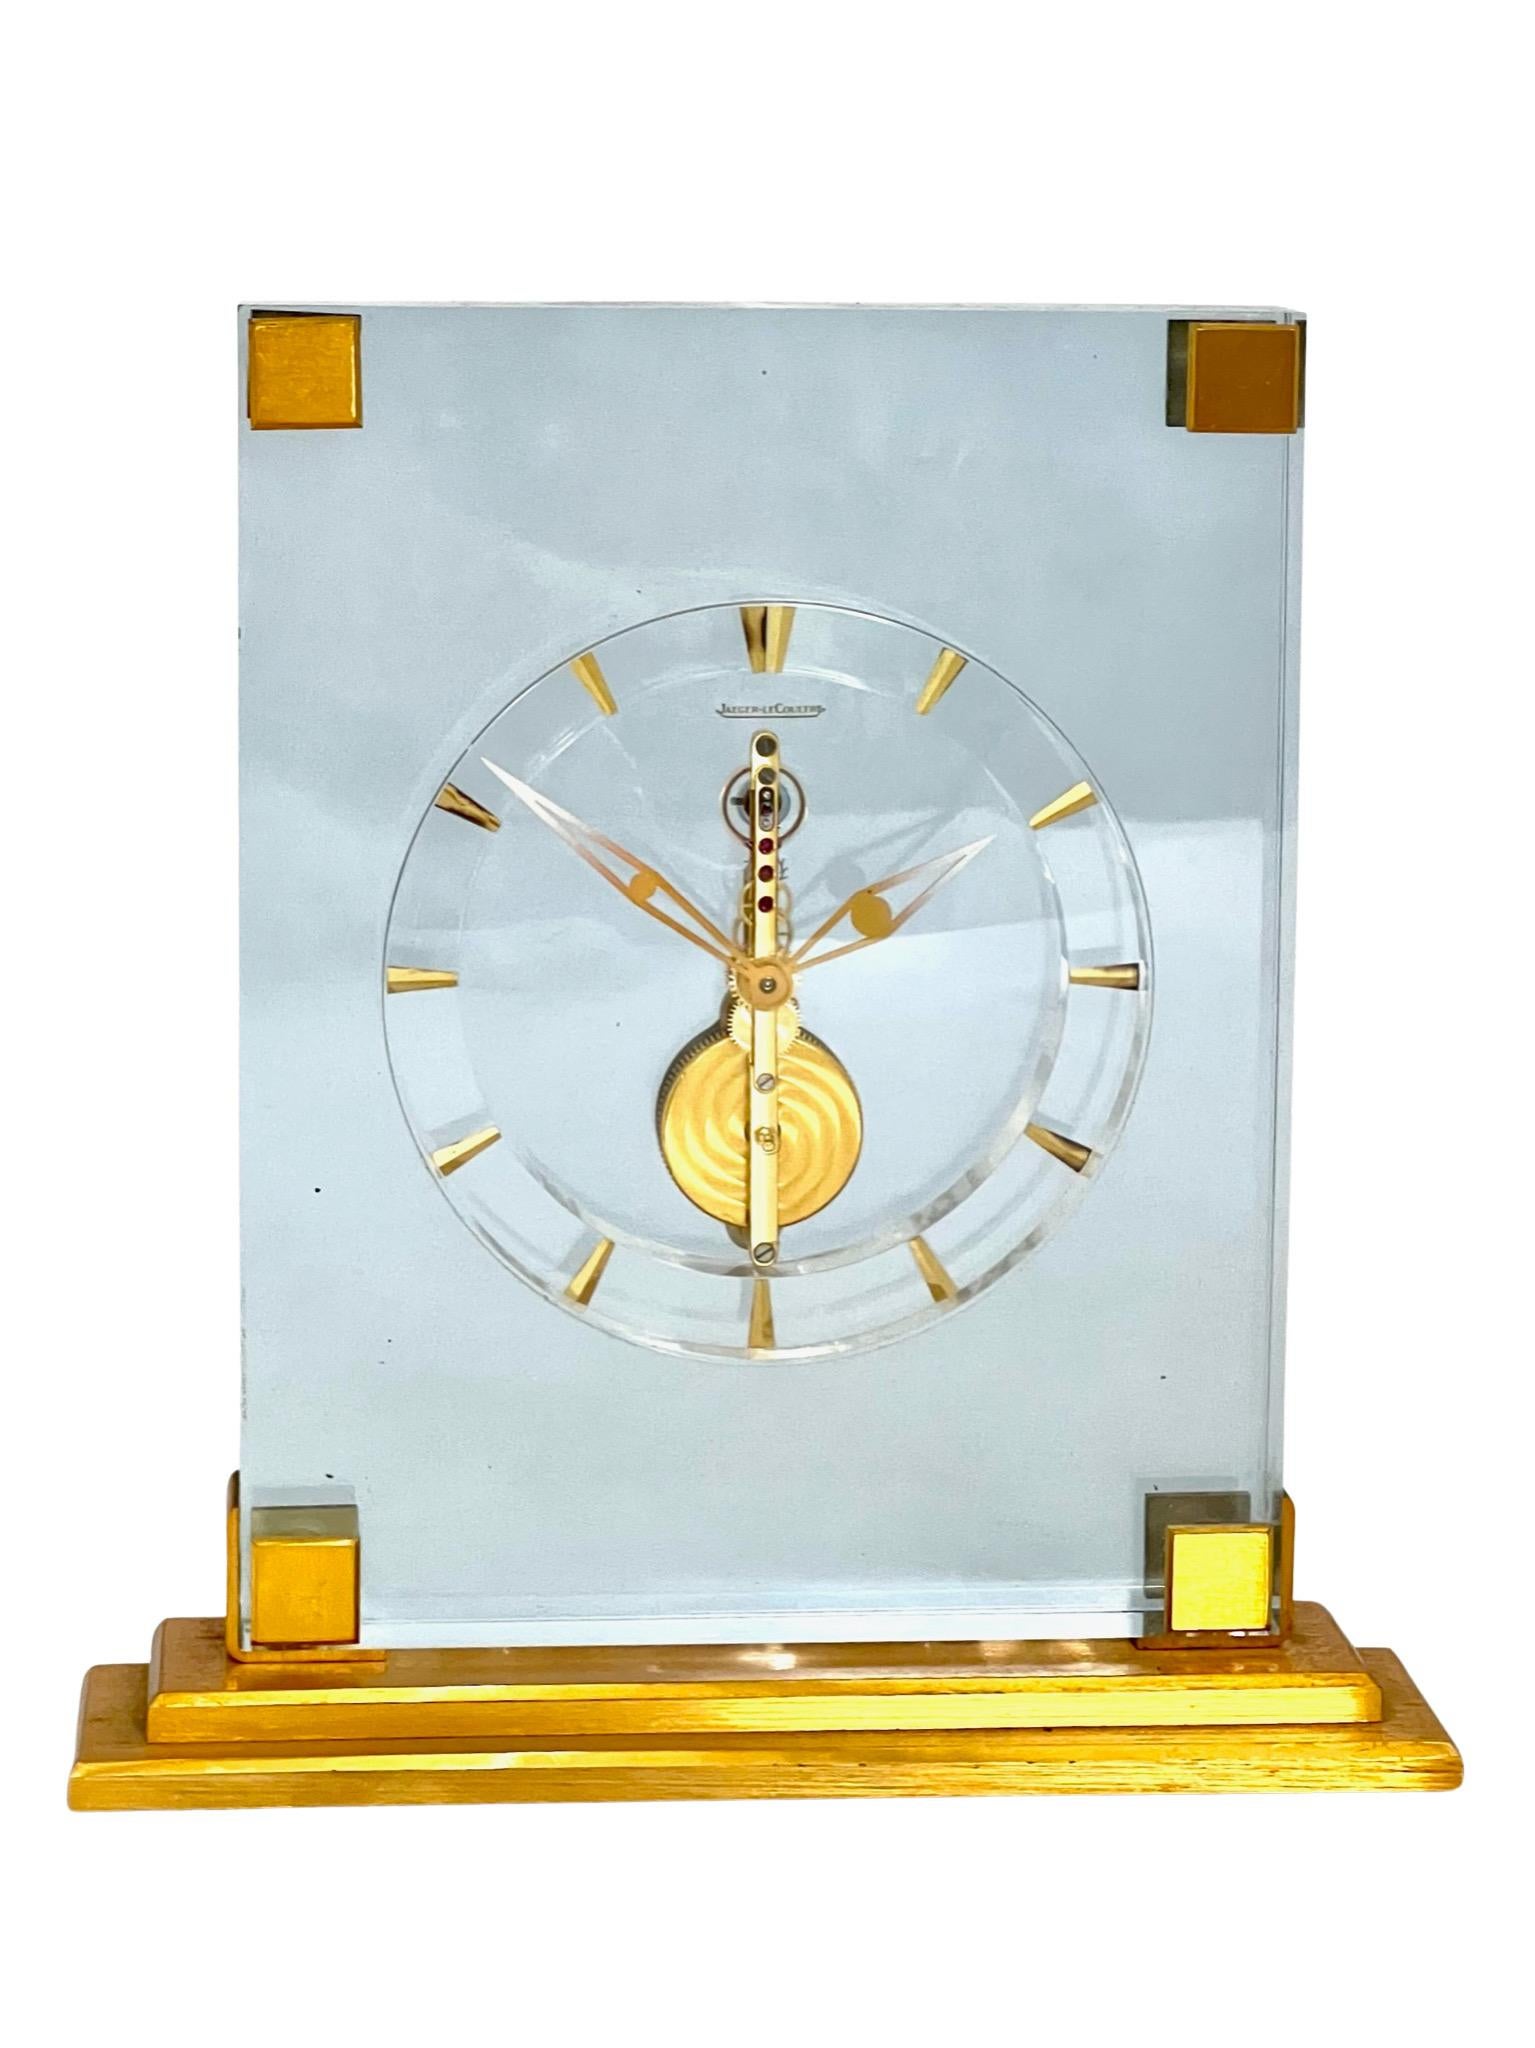 A beautifully unusual light blue lucite and brass Jaeger LeCoultre Inline Skeleton Clock, with a clean minimalistic design which would look stylish in any setting. The beauty of these skeleton clocks is that you can see the 16 jewel Swiss movement